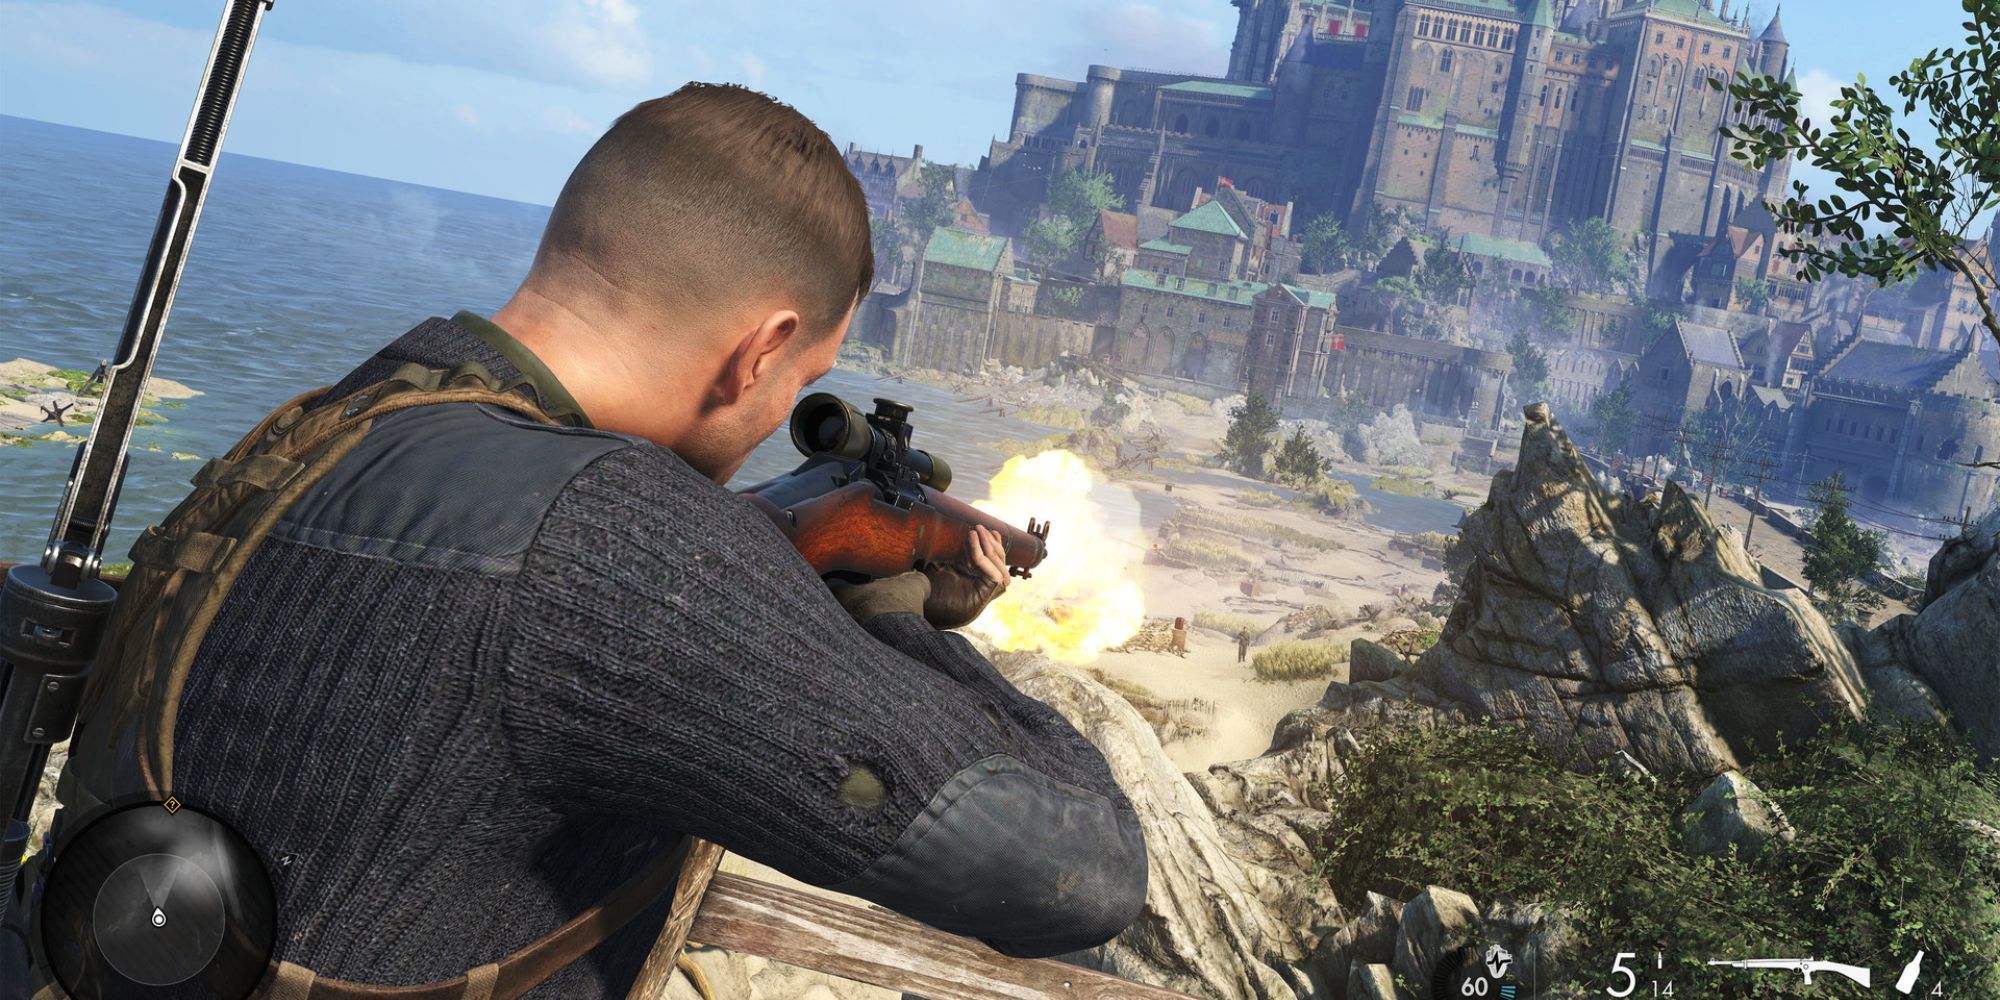 The protagonist firing from a position of height in Sniper Elite 5, with a beach below and a castle in the distance.